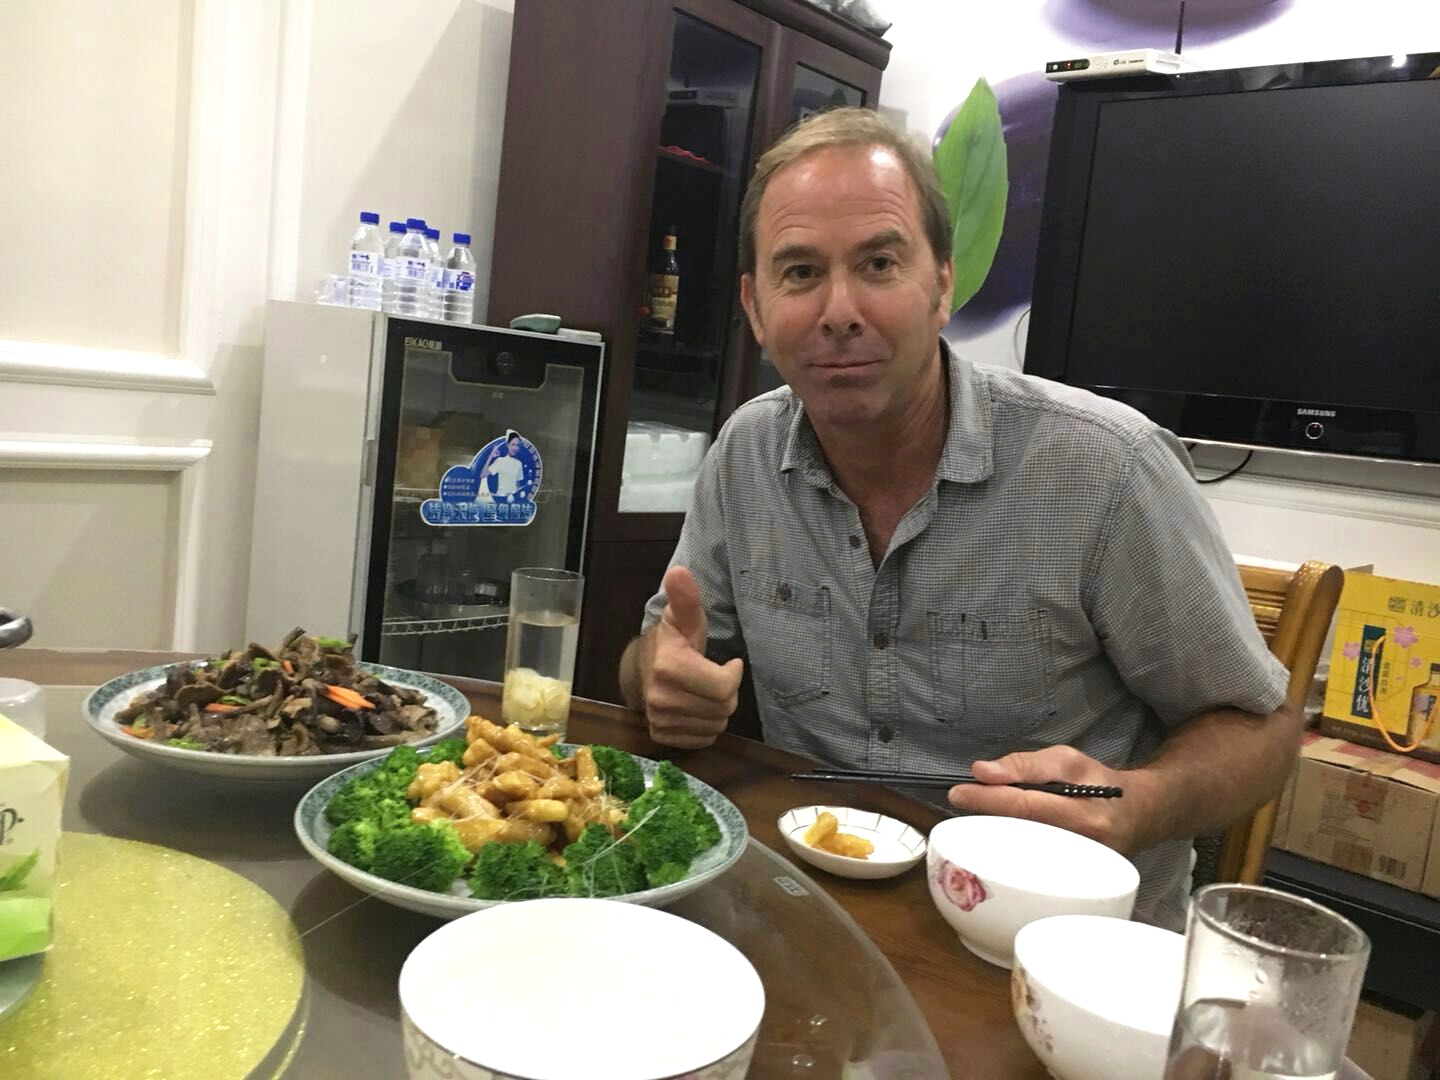 David enjoying multi-course traditional Chinese meal in Chinese processing facility office.